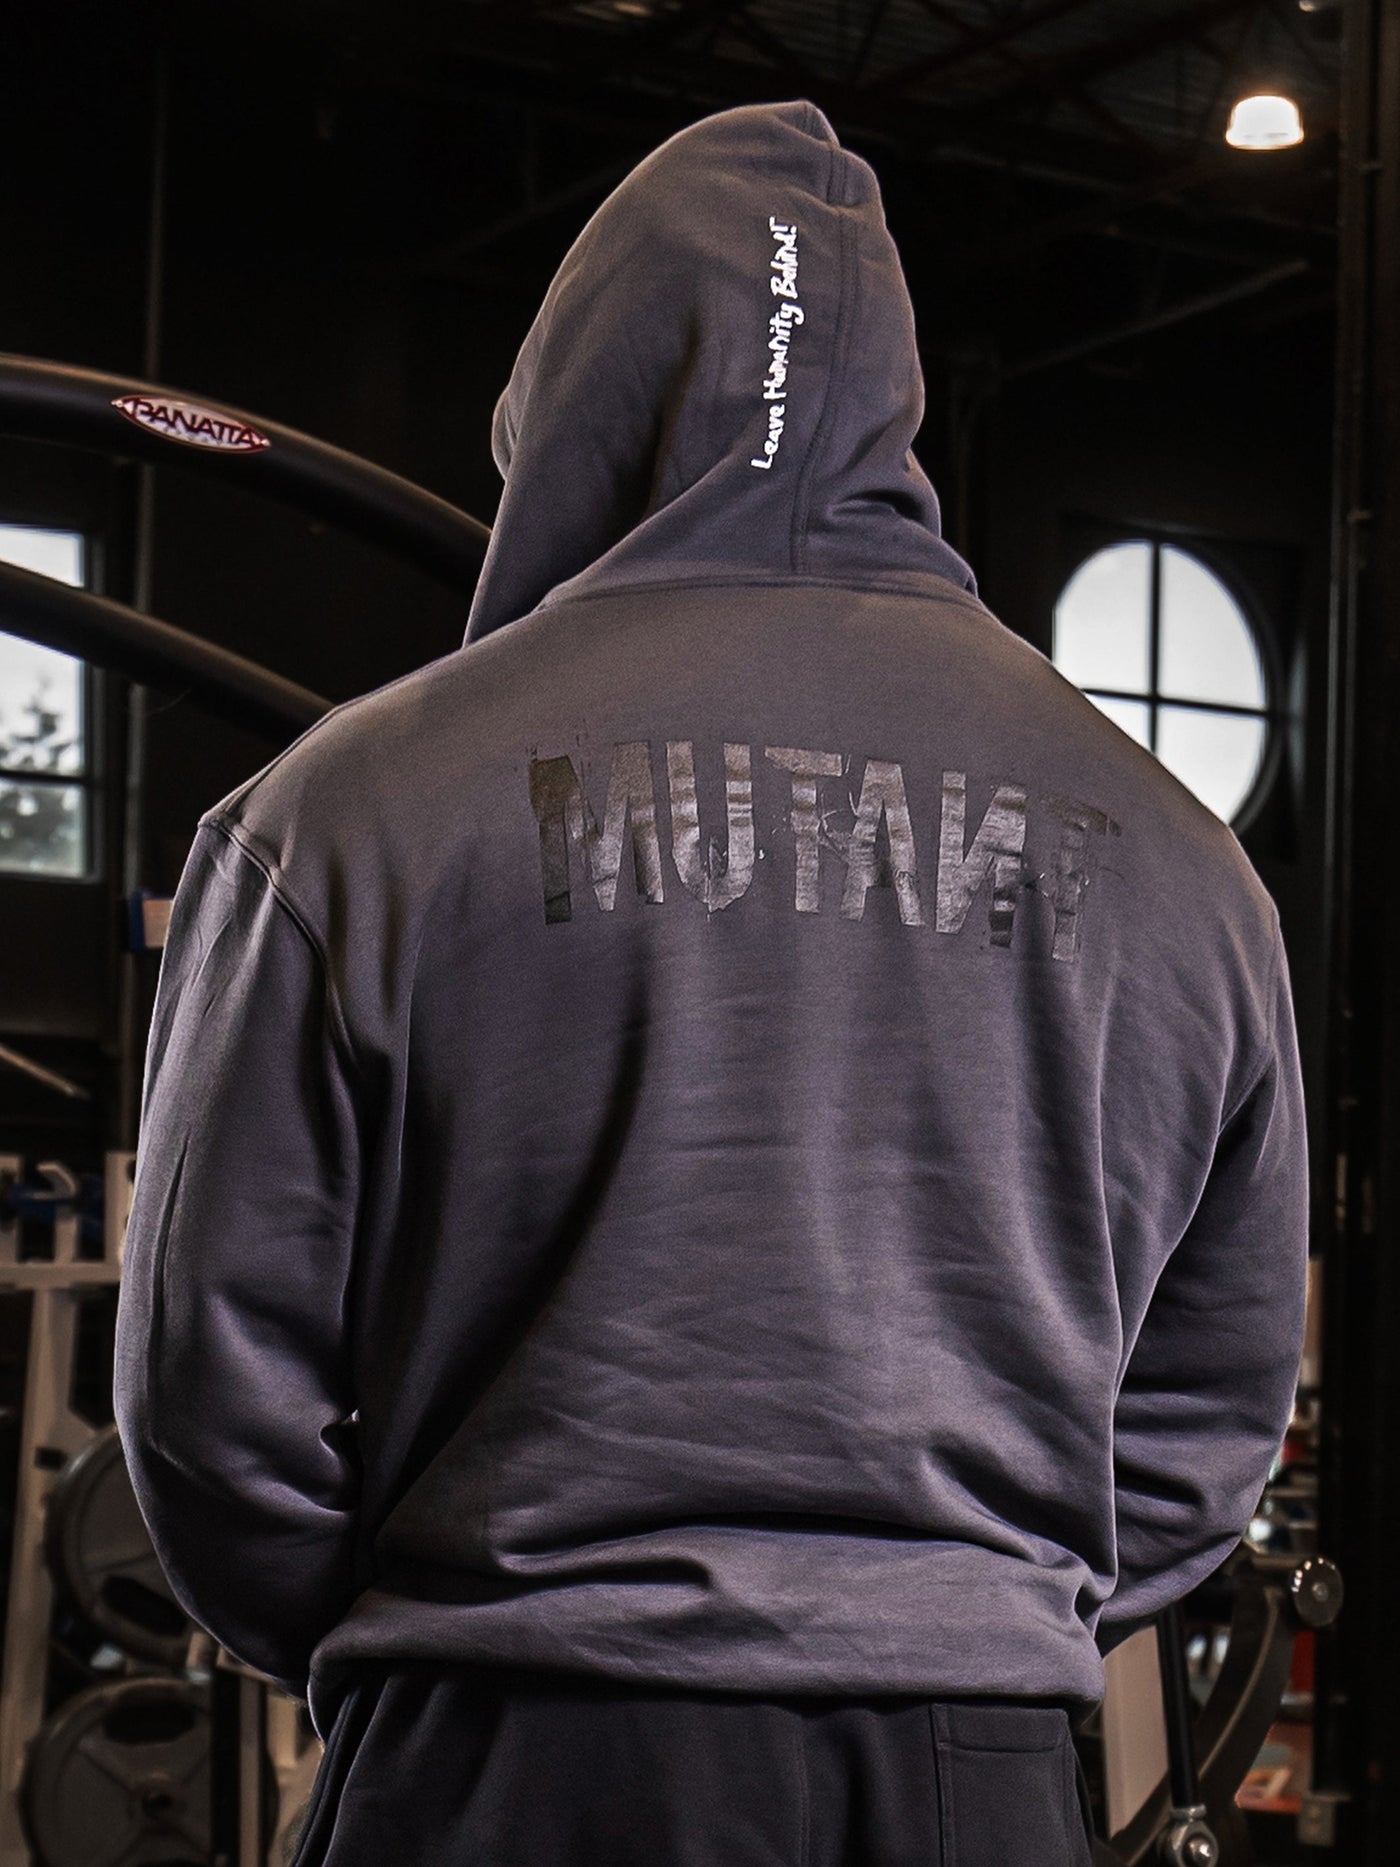 Back view of an athlete posing in the gym, wearing the Grey Mutant Patched Zip-Up Gym Hoodie. The hoodie features a black Mutant logo on the back and the white Mutant motto 'Leave Humanity Behind' on the hood.